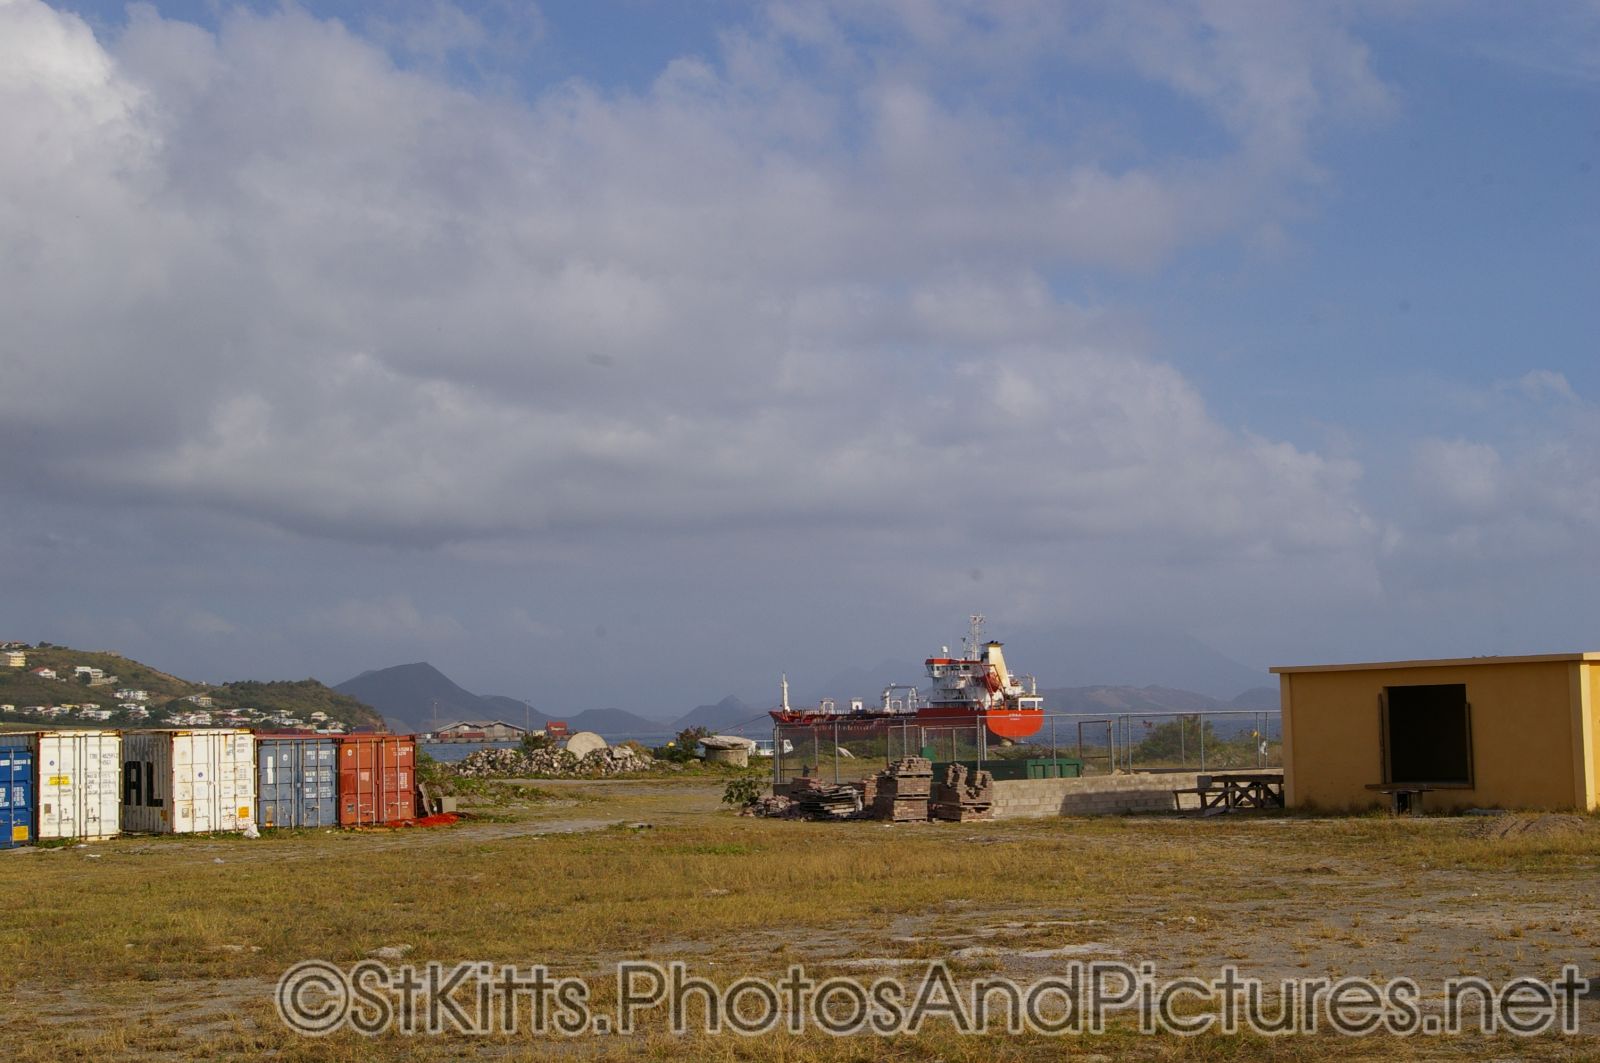 Cargo containers and ship in St Kitts.jpg
